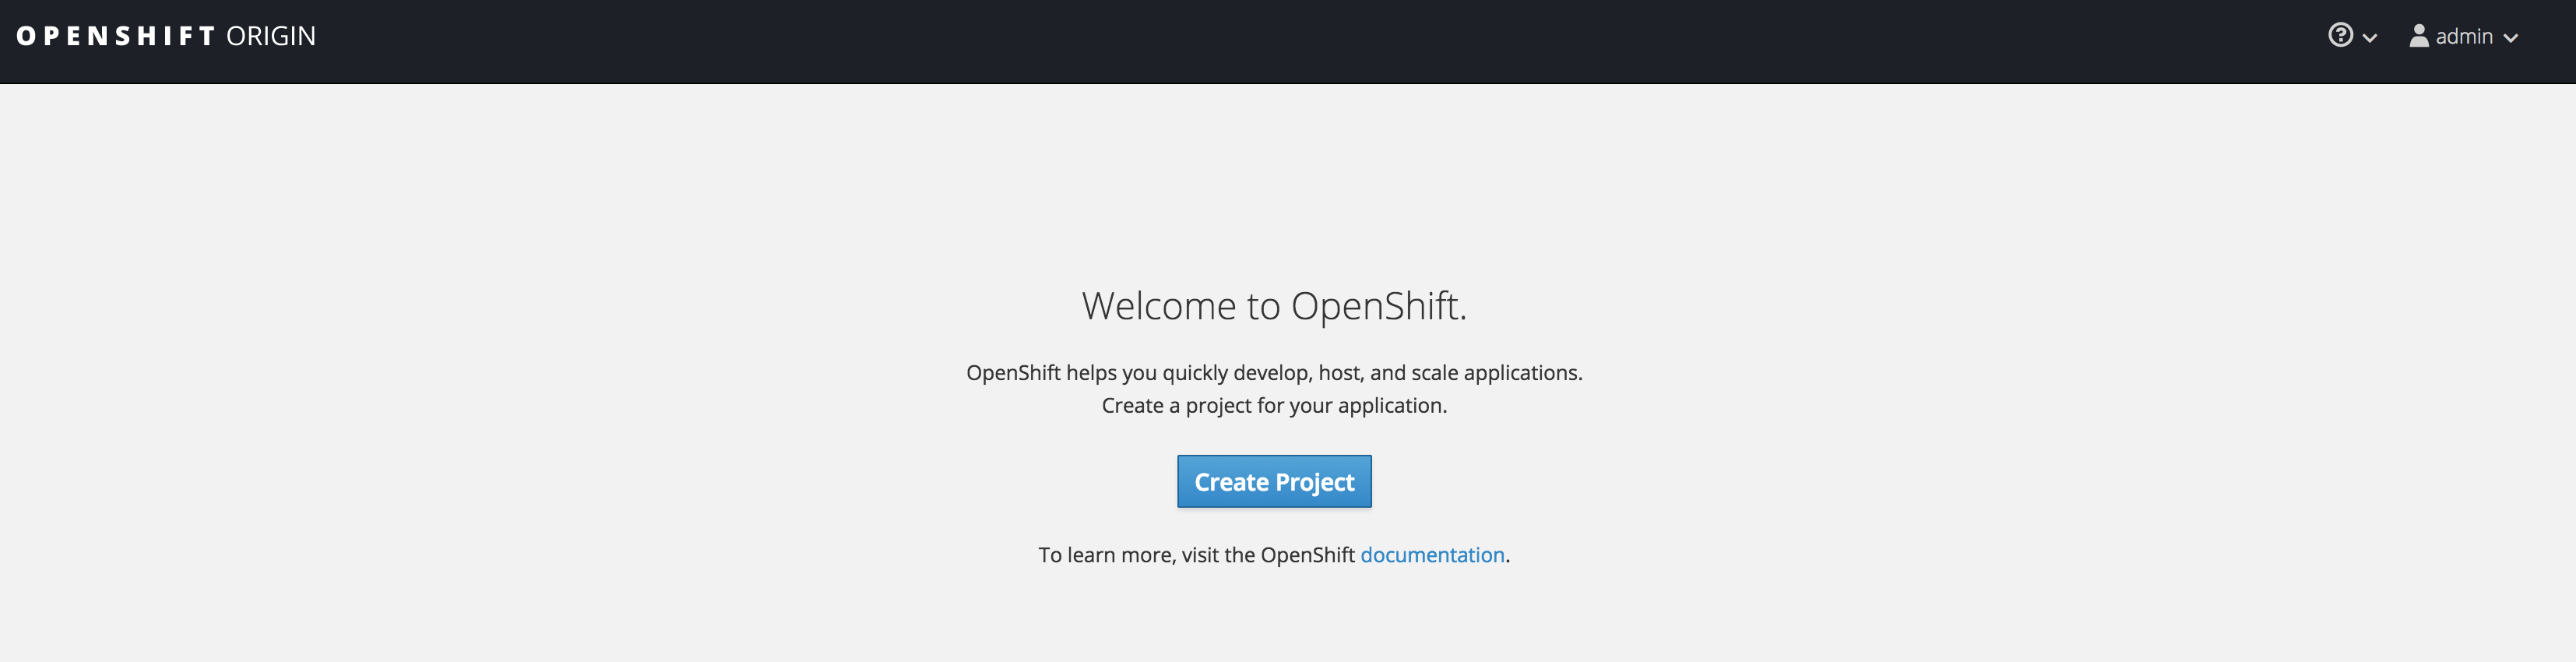 Welcome to OpenShift